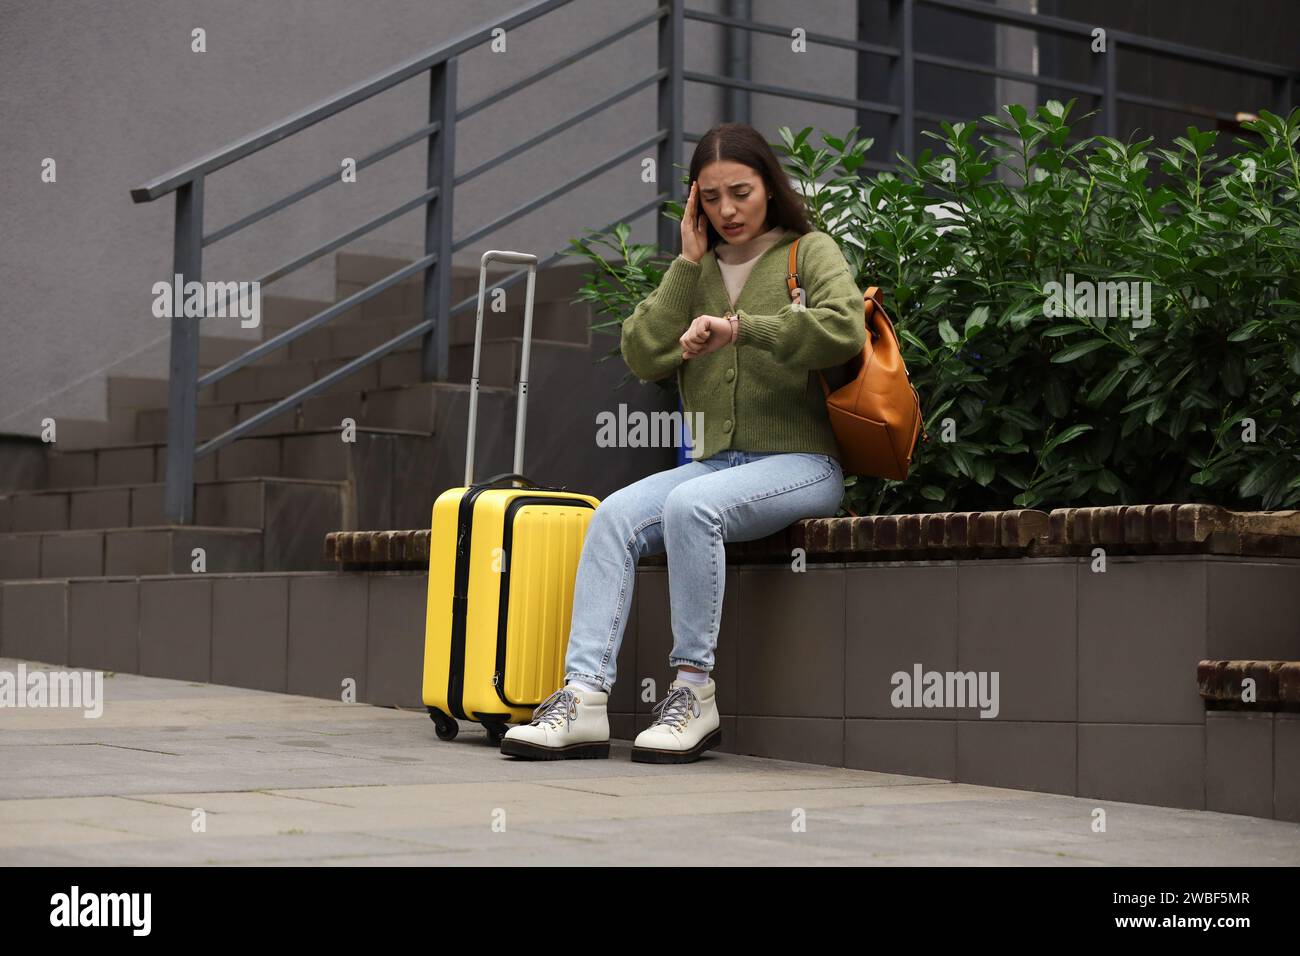 Being late. Worried woman with suitcase looking at watch on bench outdoors, space for text Stock Photo